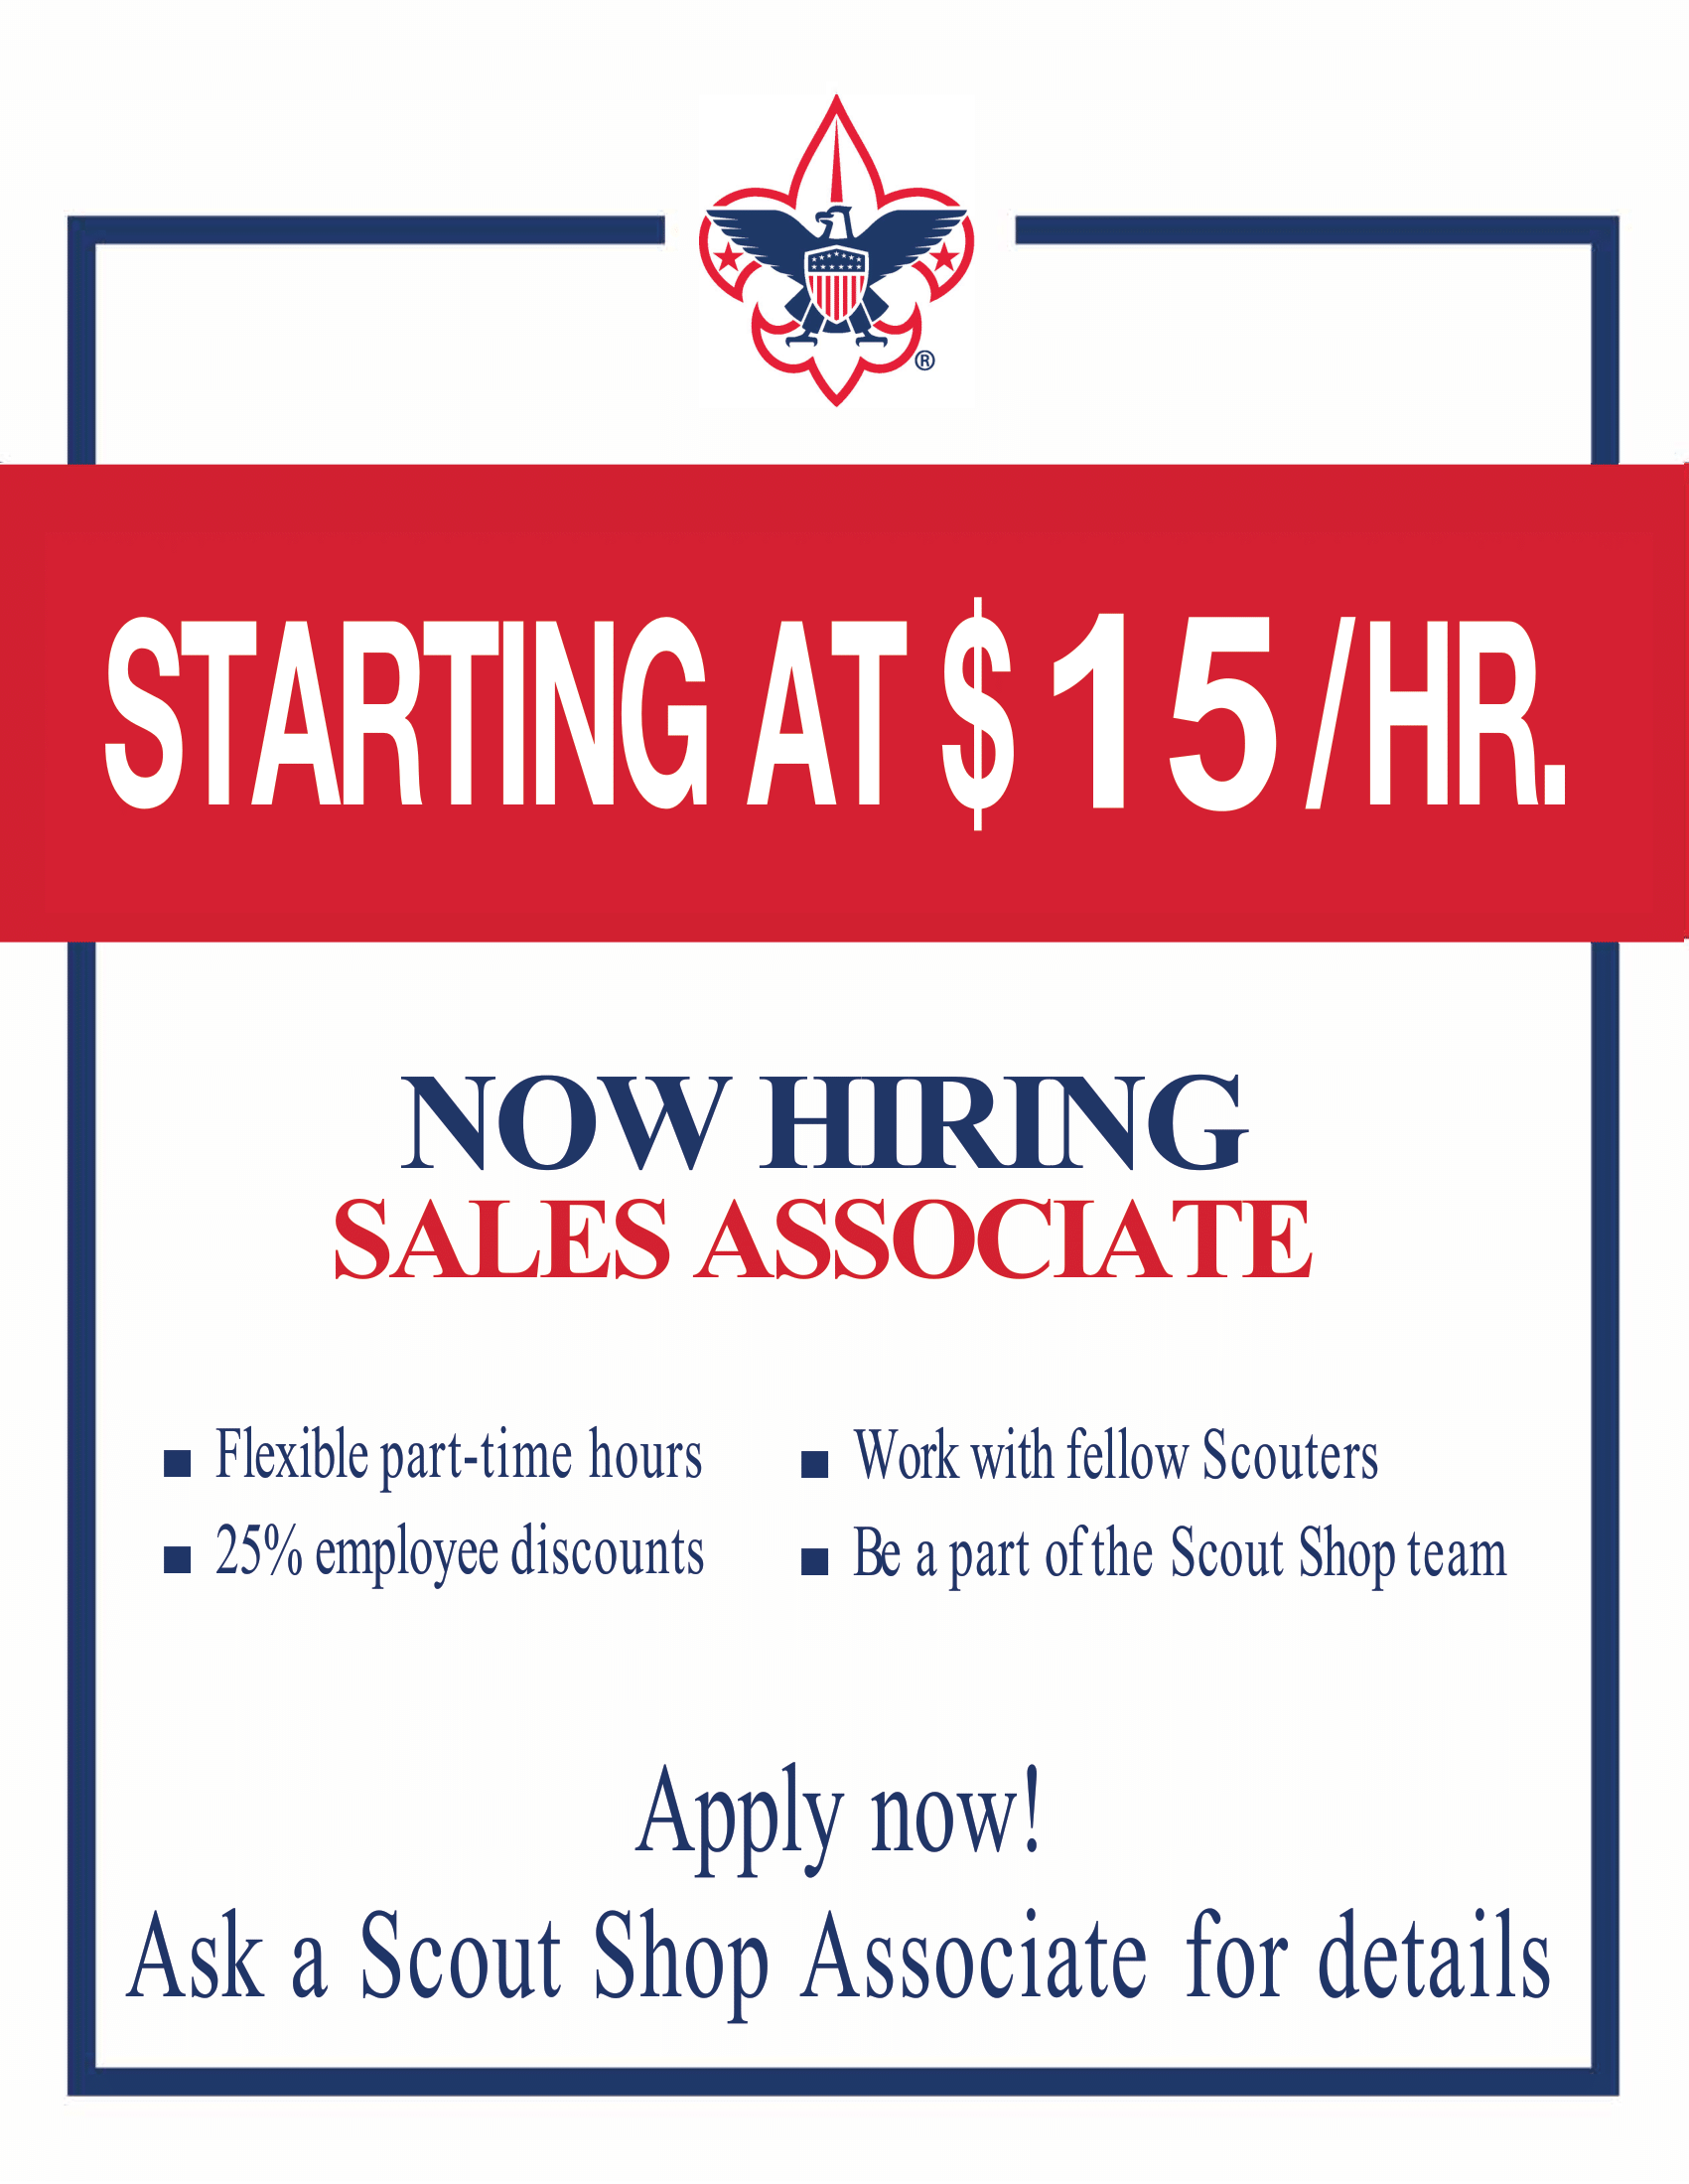 Starting at $15 an hour - now hiring a sales associate. This position has flexible part-time hours and has a 25% employee discount. Apply now! Ask a Scout Shop Associate for details.